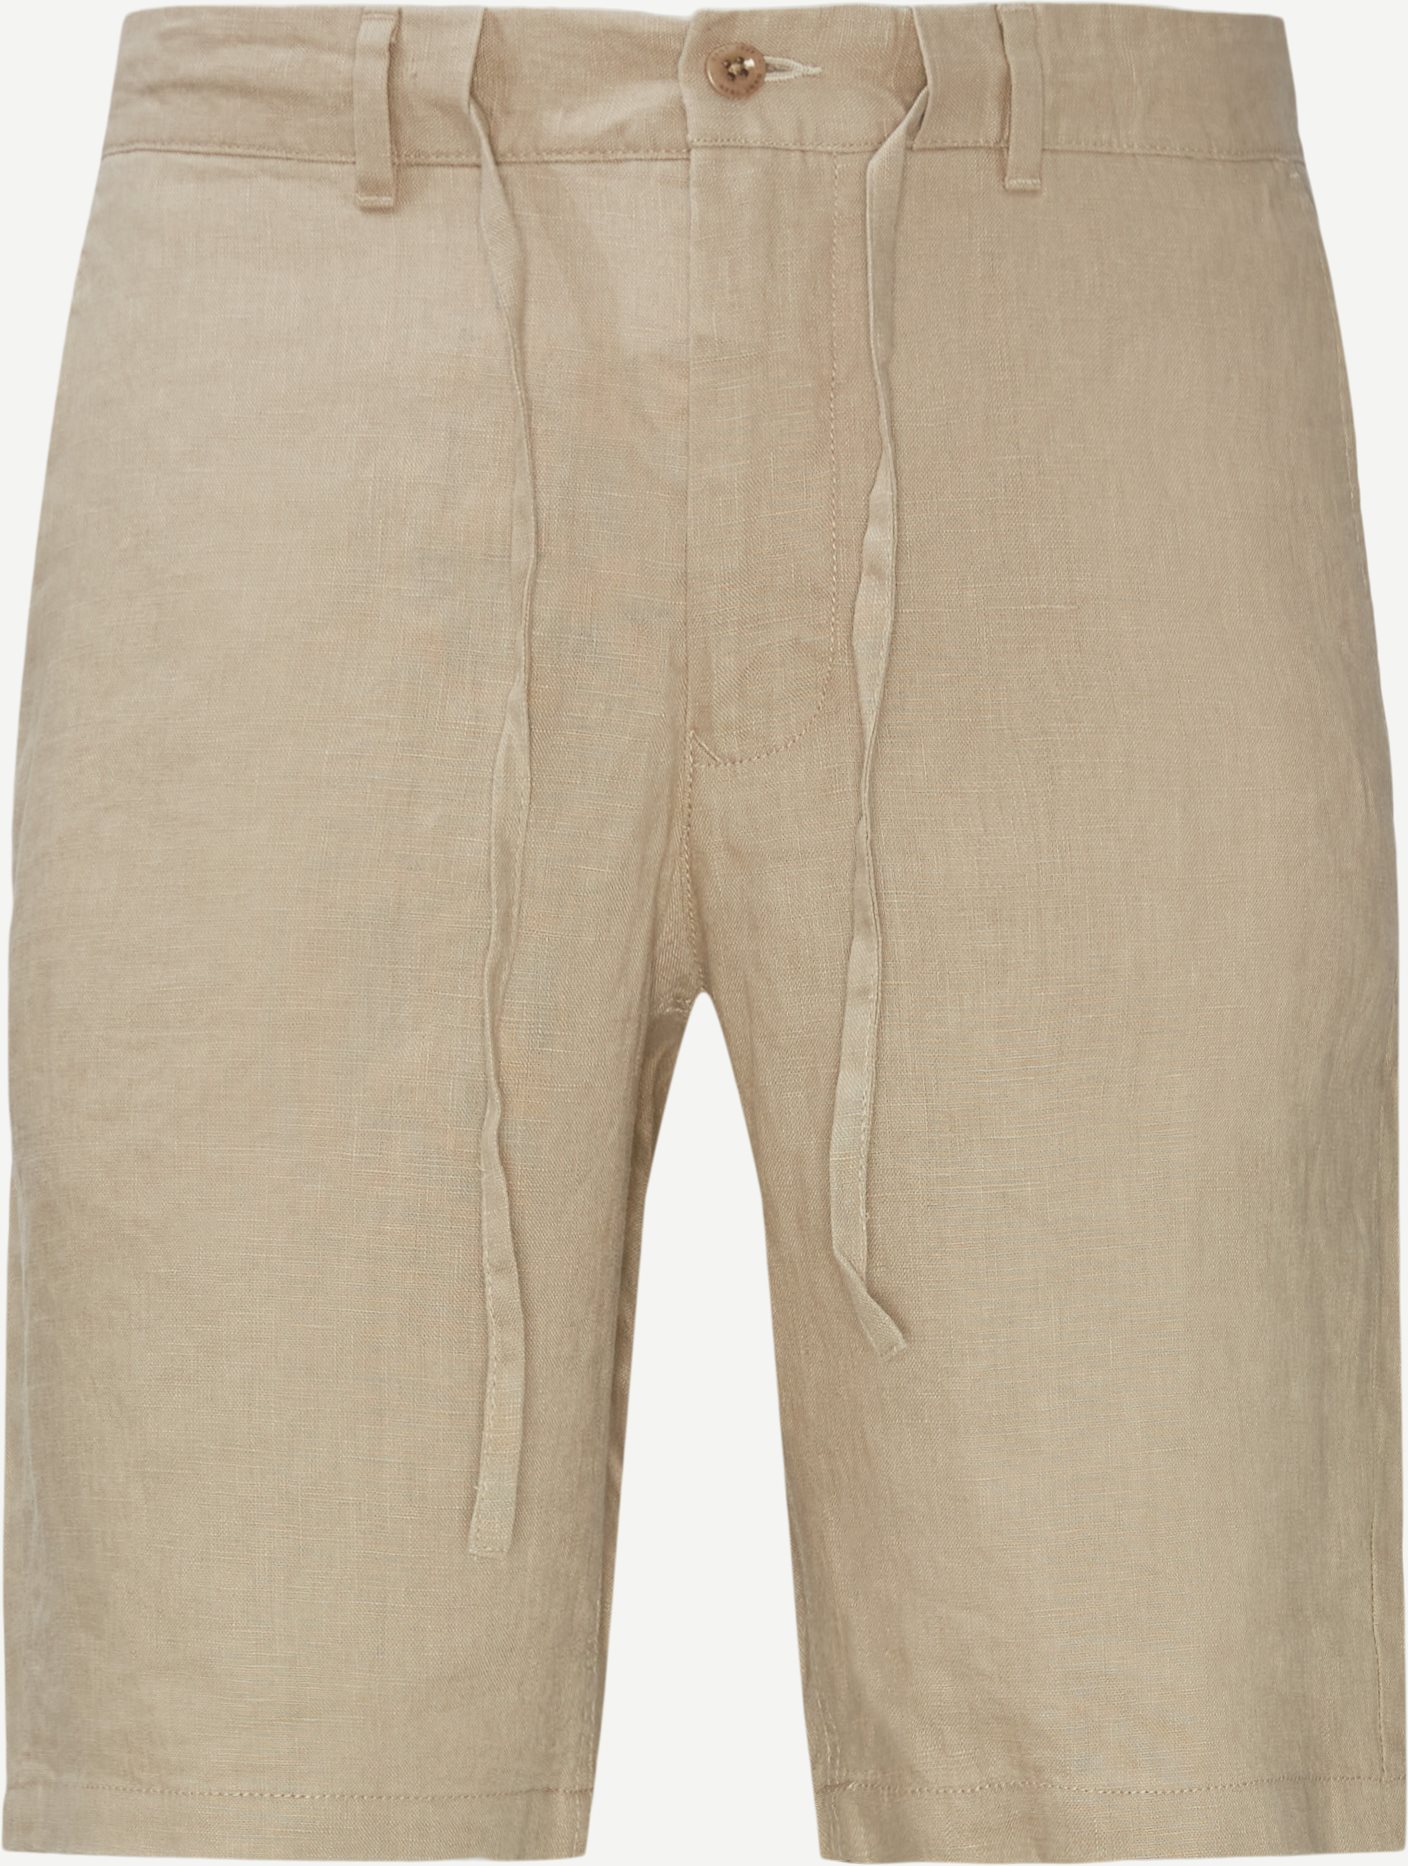 Relaxed Linen DS Shorts - Shorts - Relaxed fit - Sand